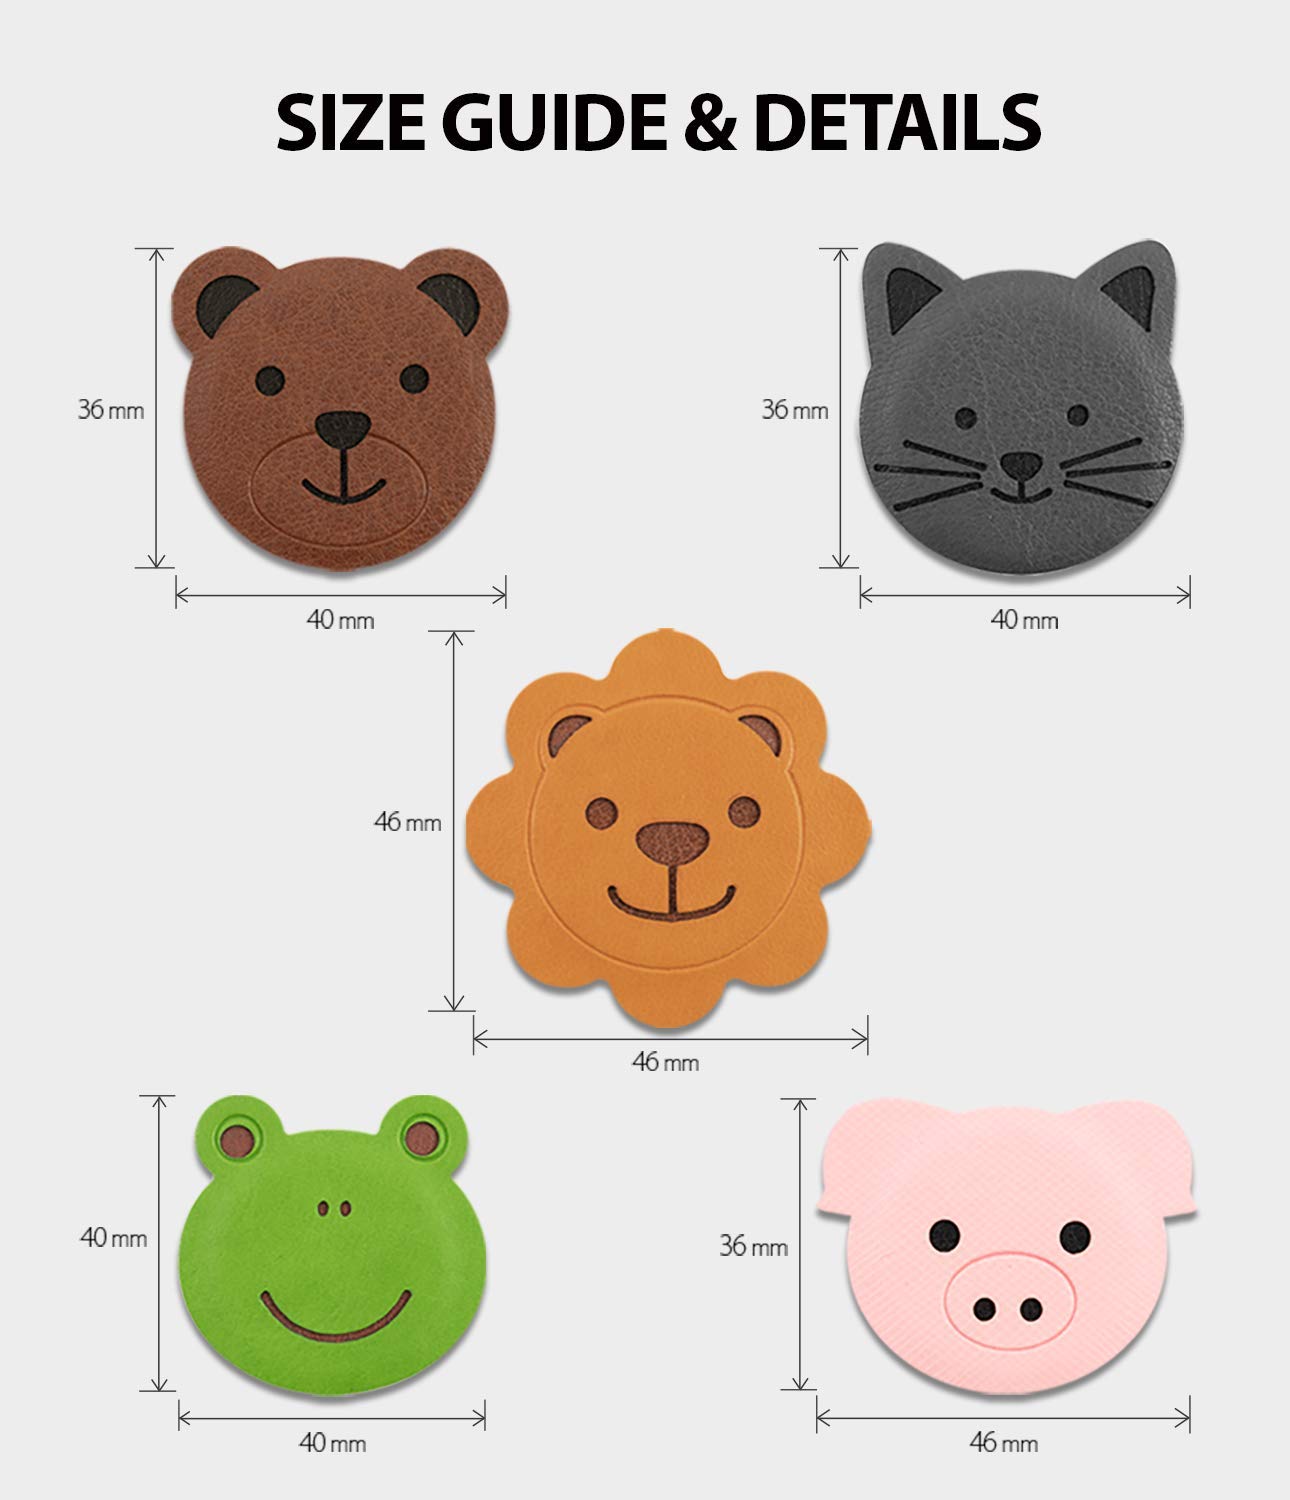 ringke magnetic character metal plate kit animal edition size guide